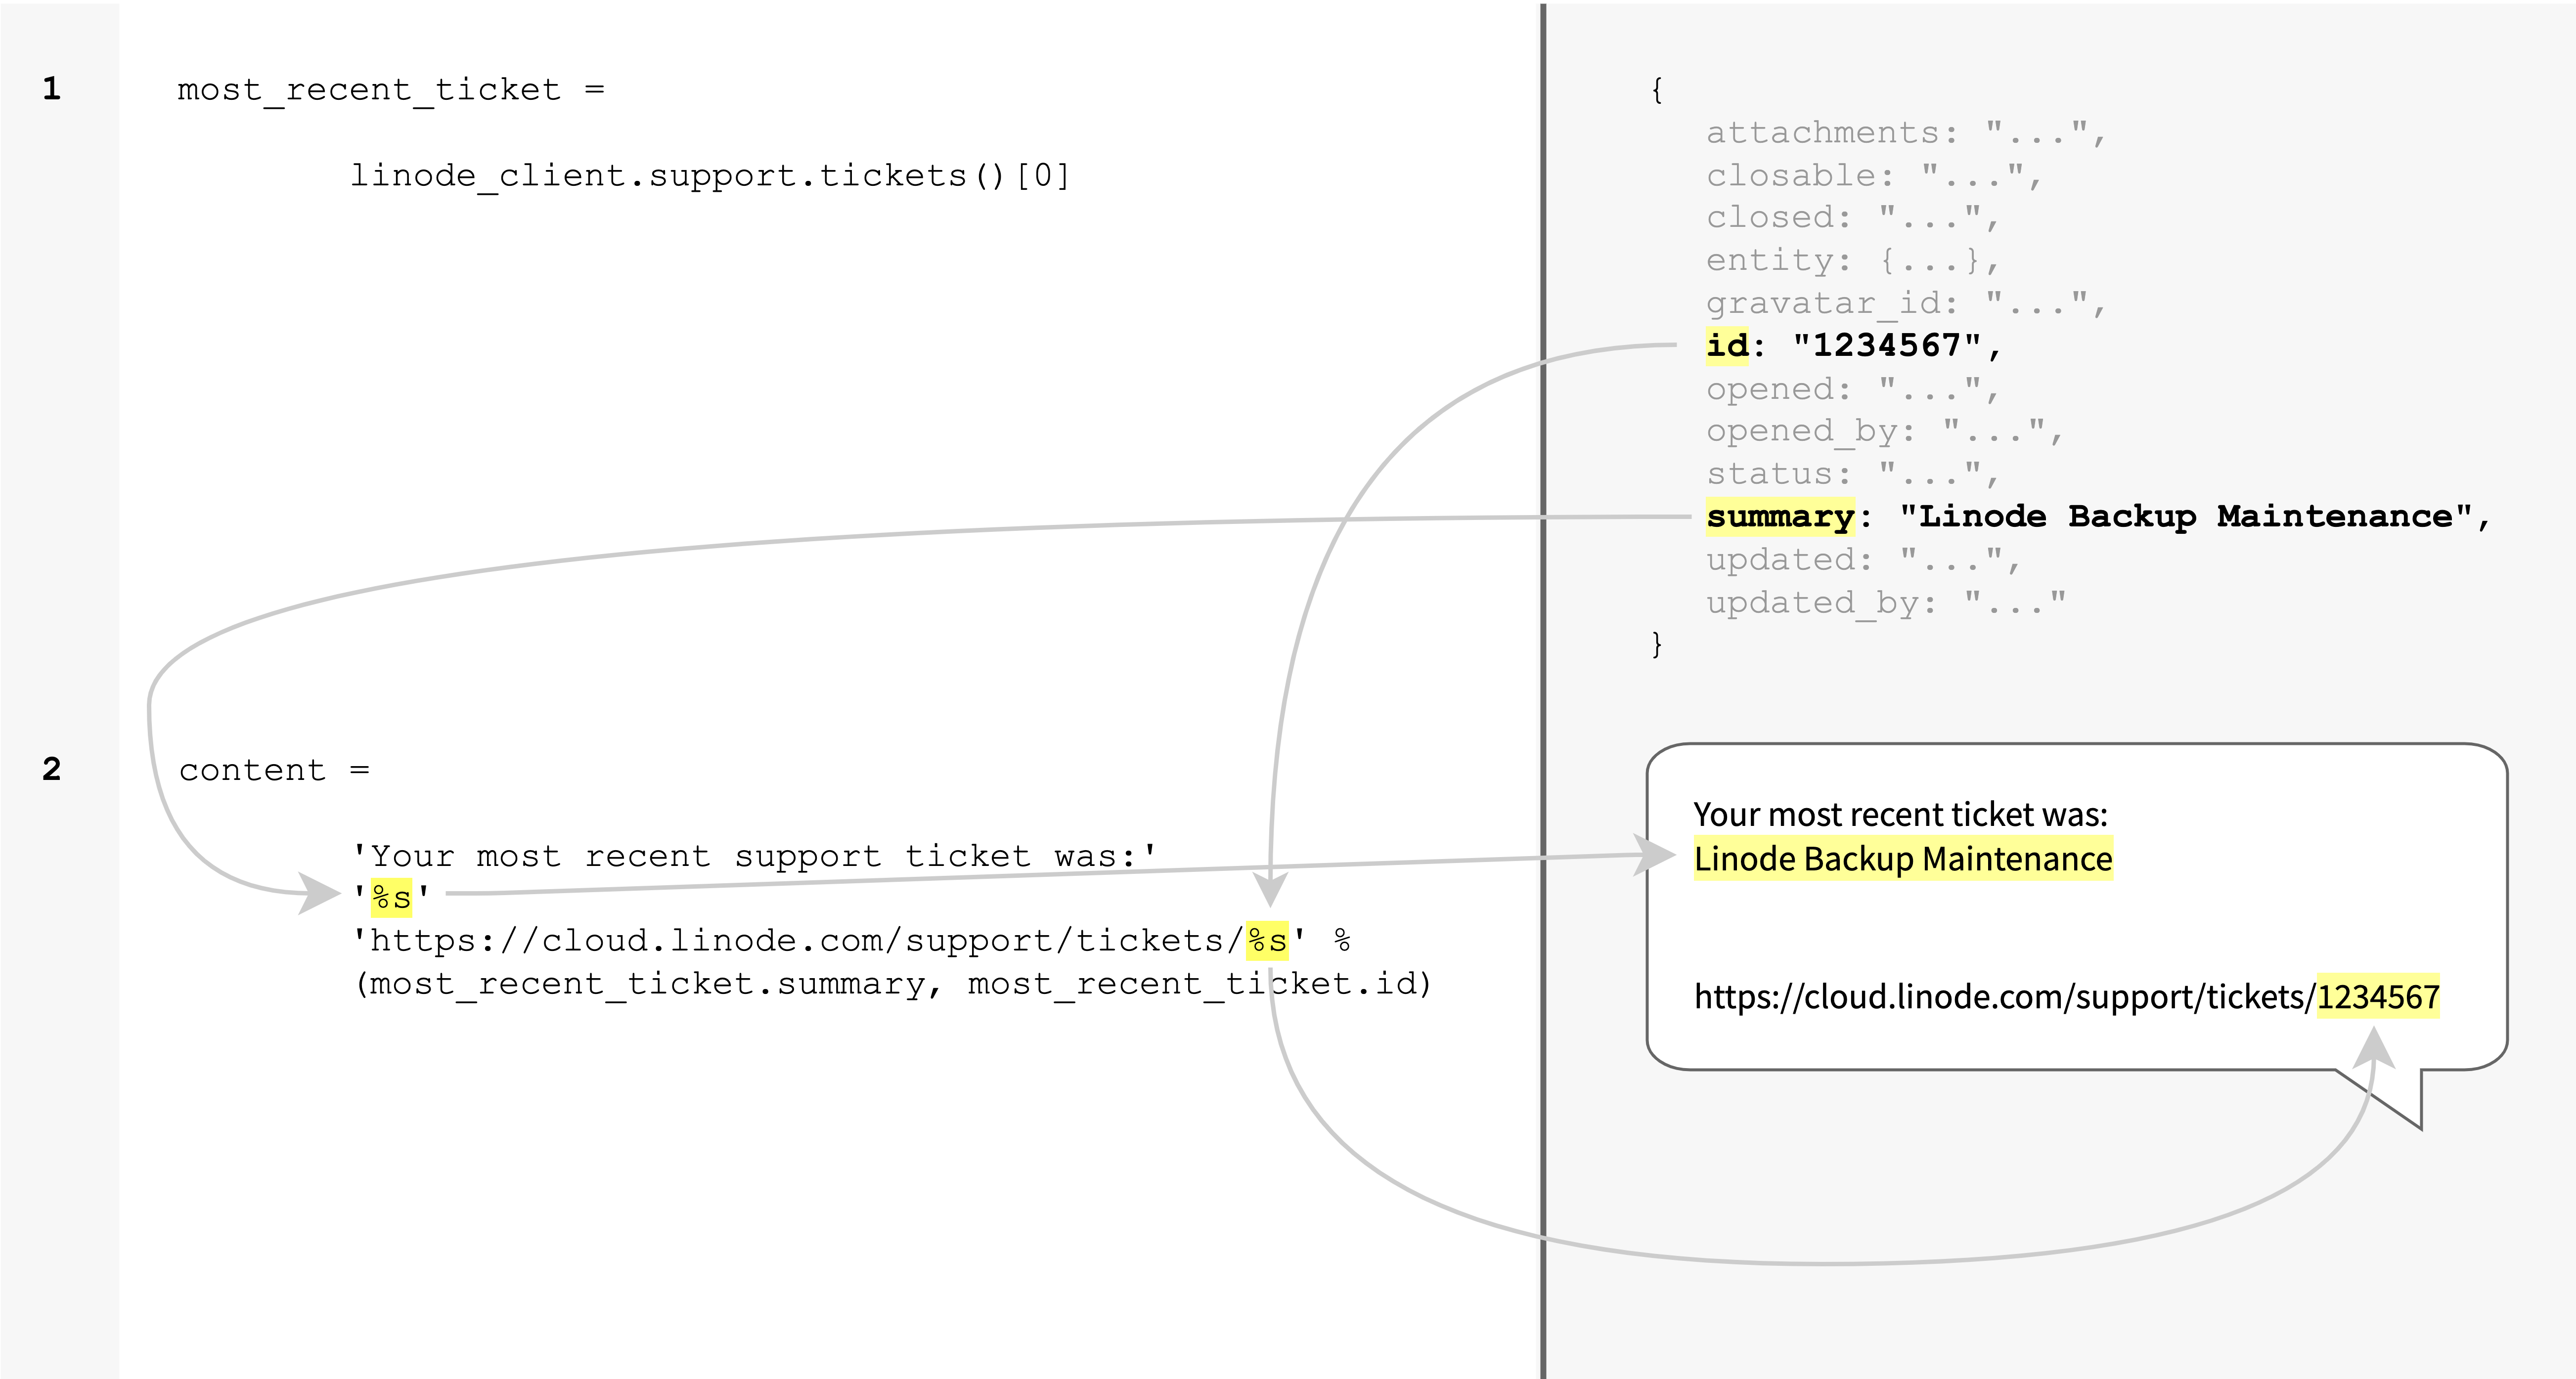 Diagram - Linode support ticket object to message text